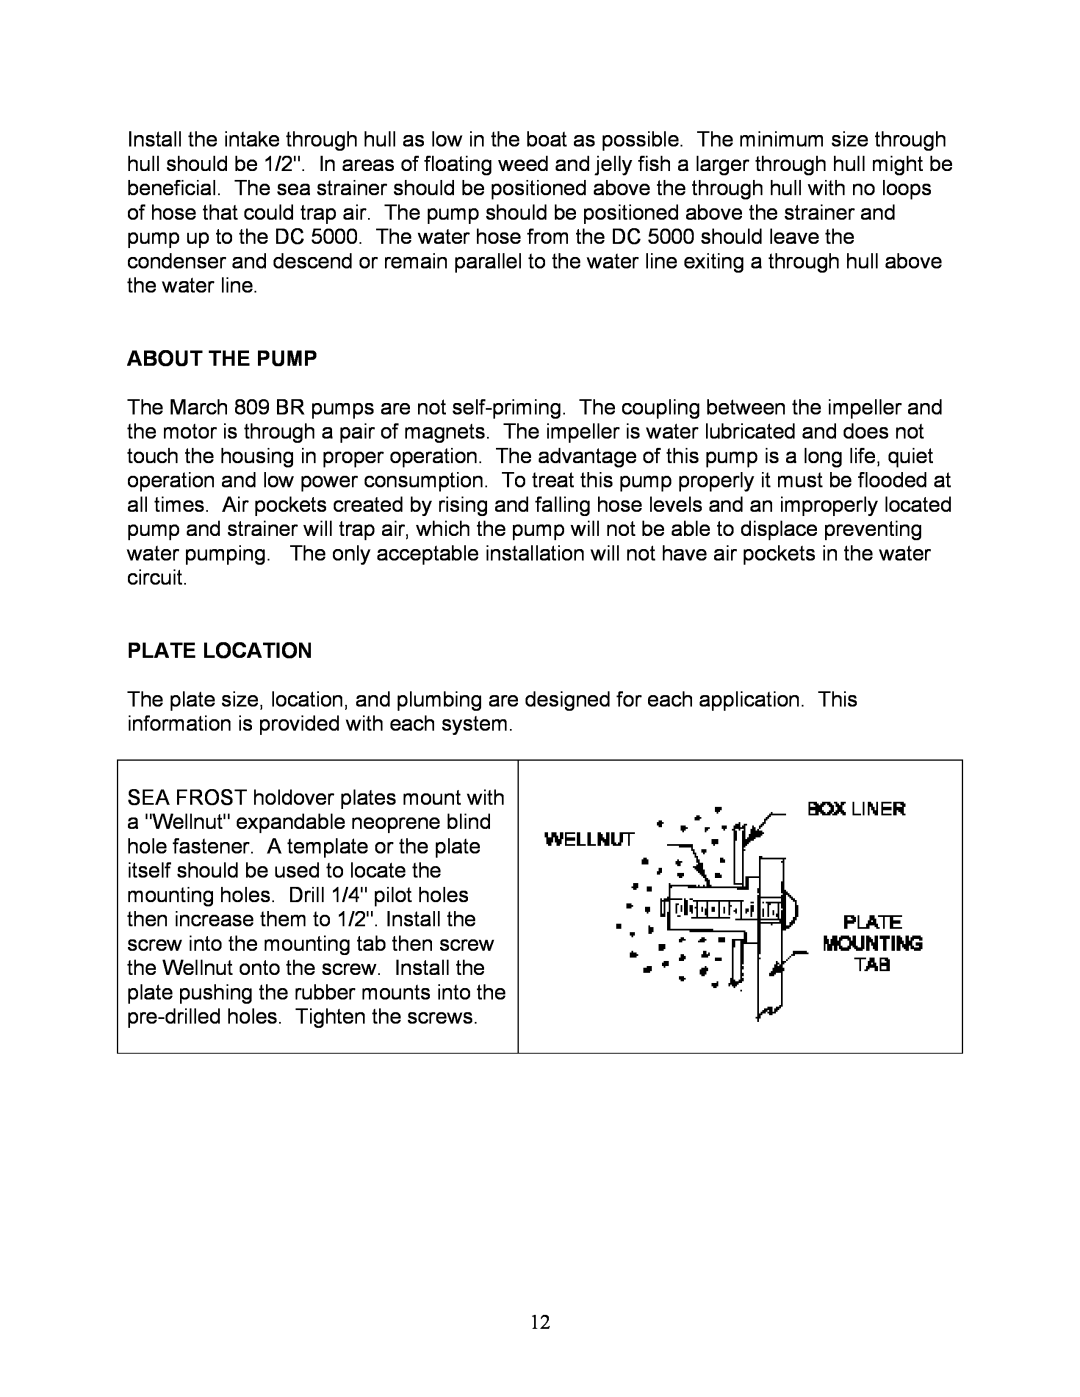 Sea Frost DC 5000 installation instructions About The Pump, Plate Location 